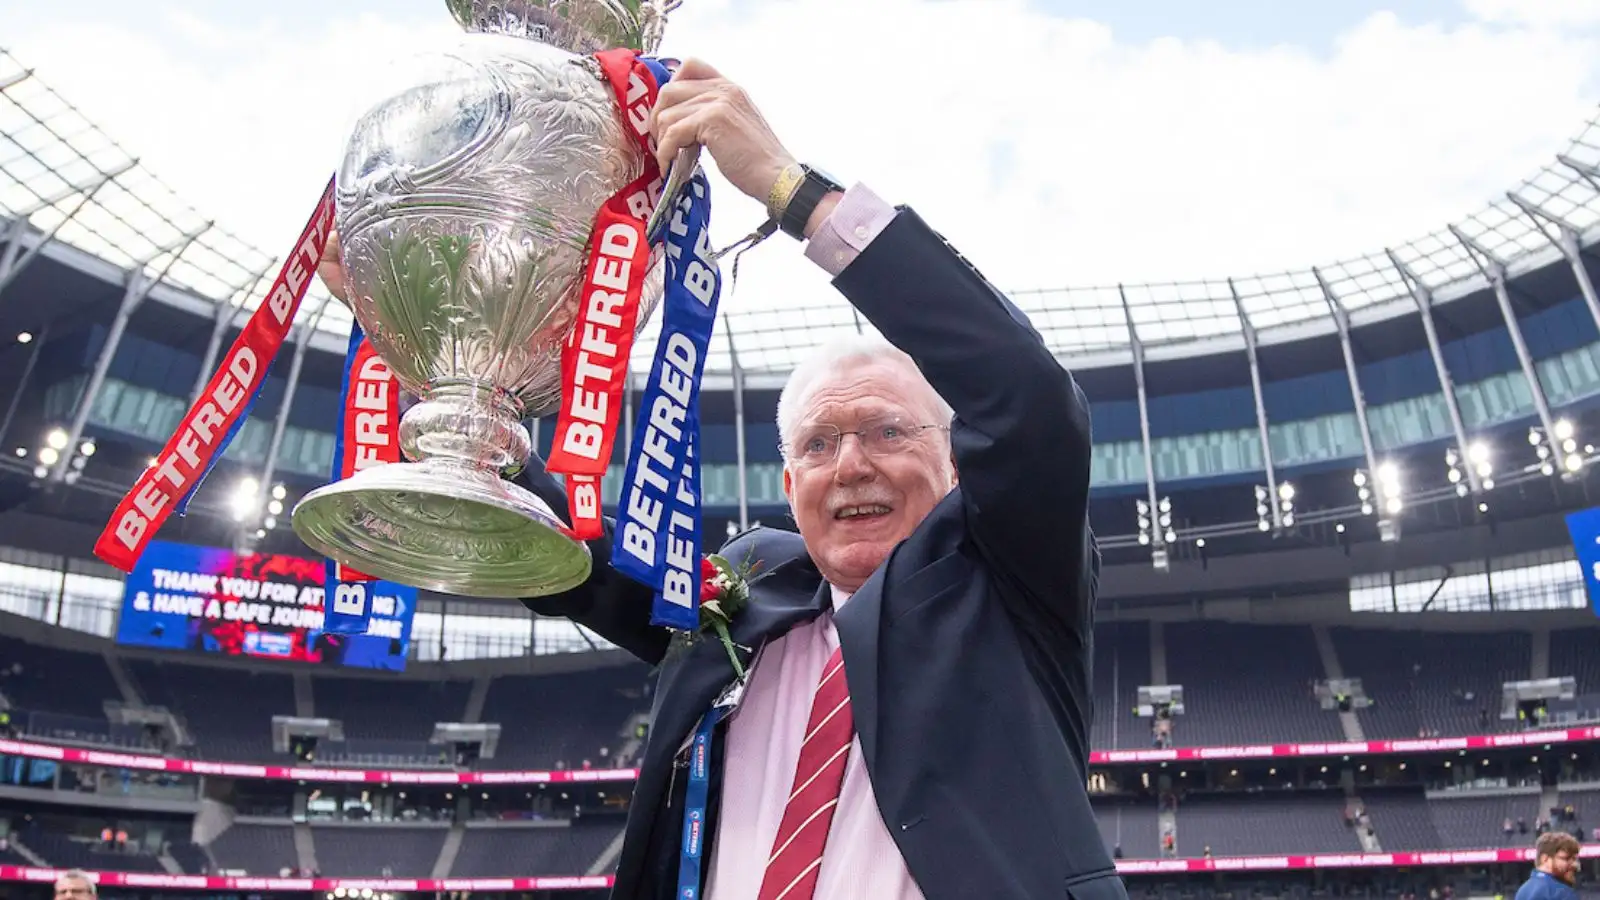 Wigan Warriors chairman Ian Lenagan shares heartfelt message after decision to step down at end of season